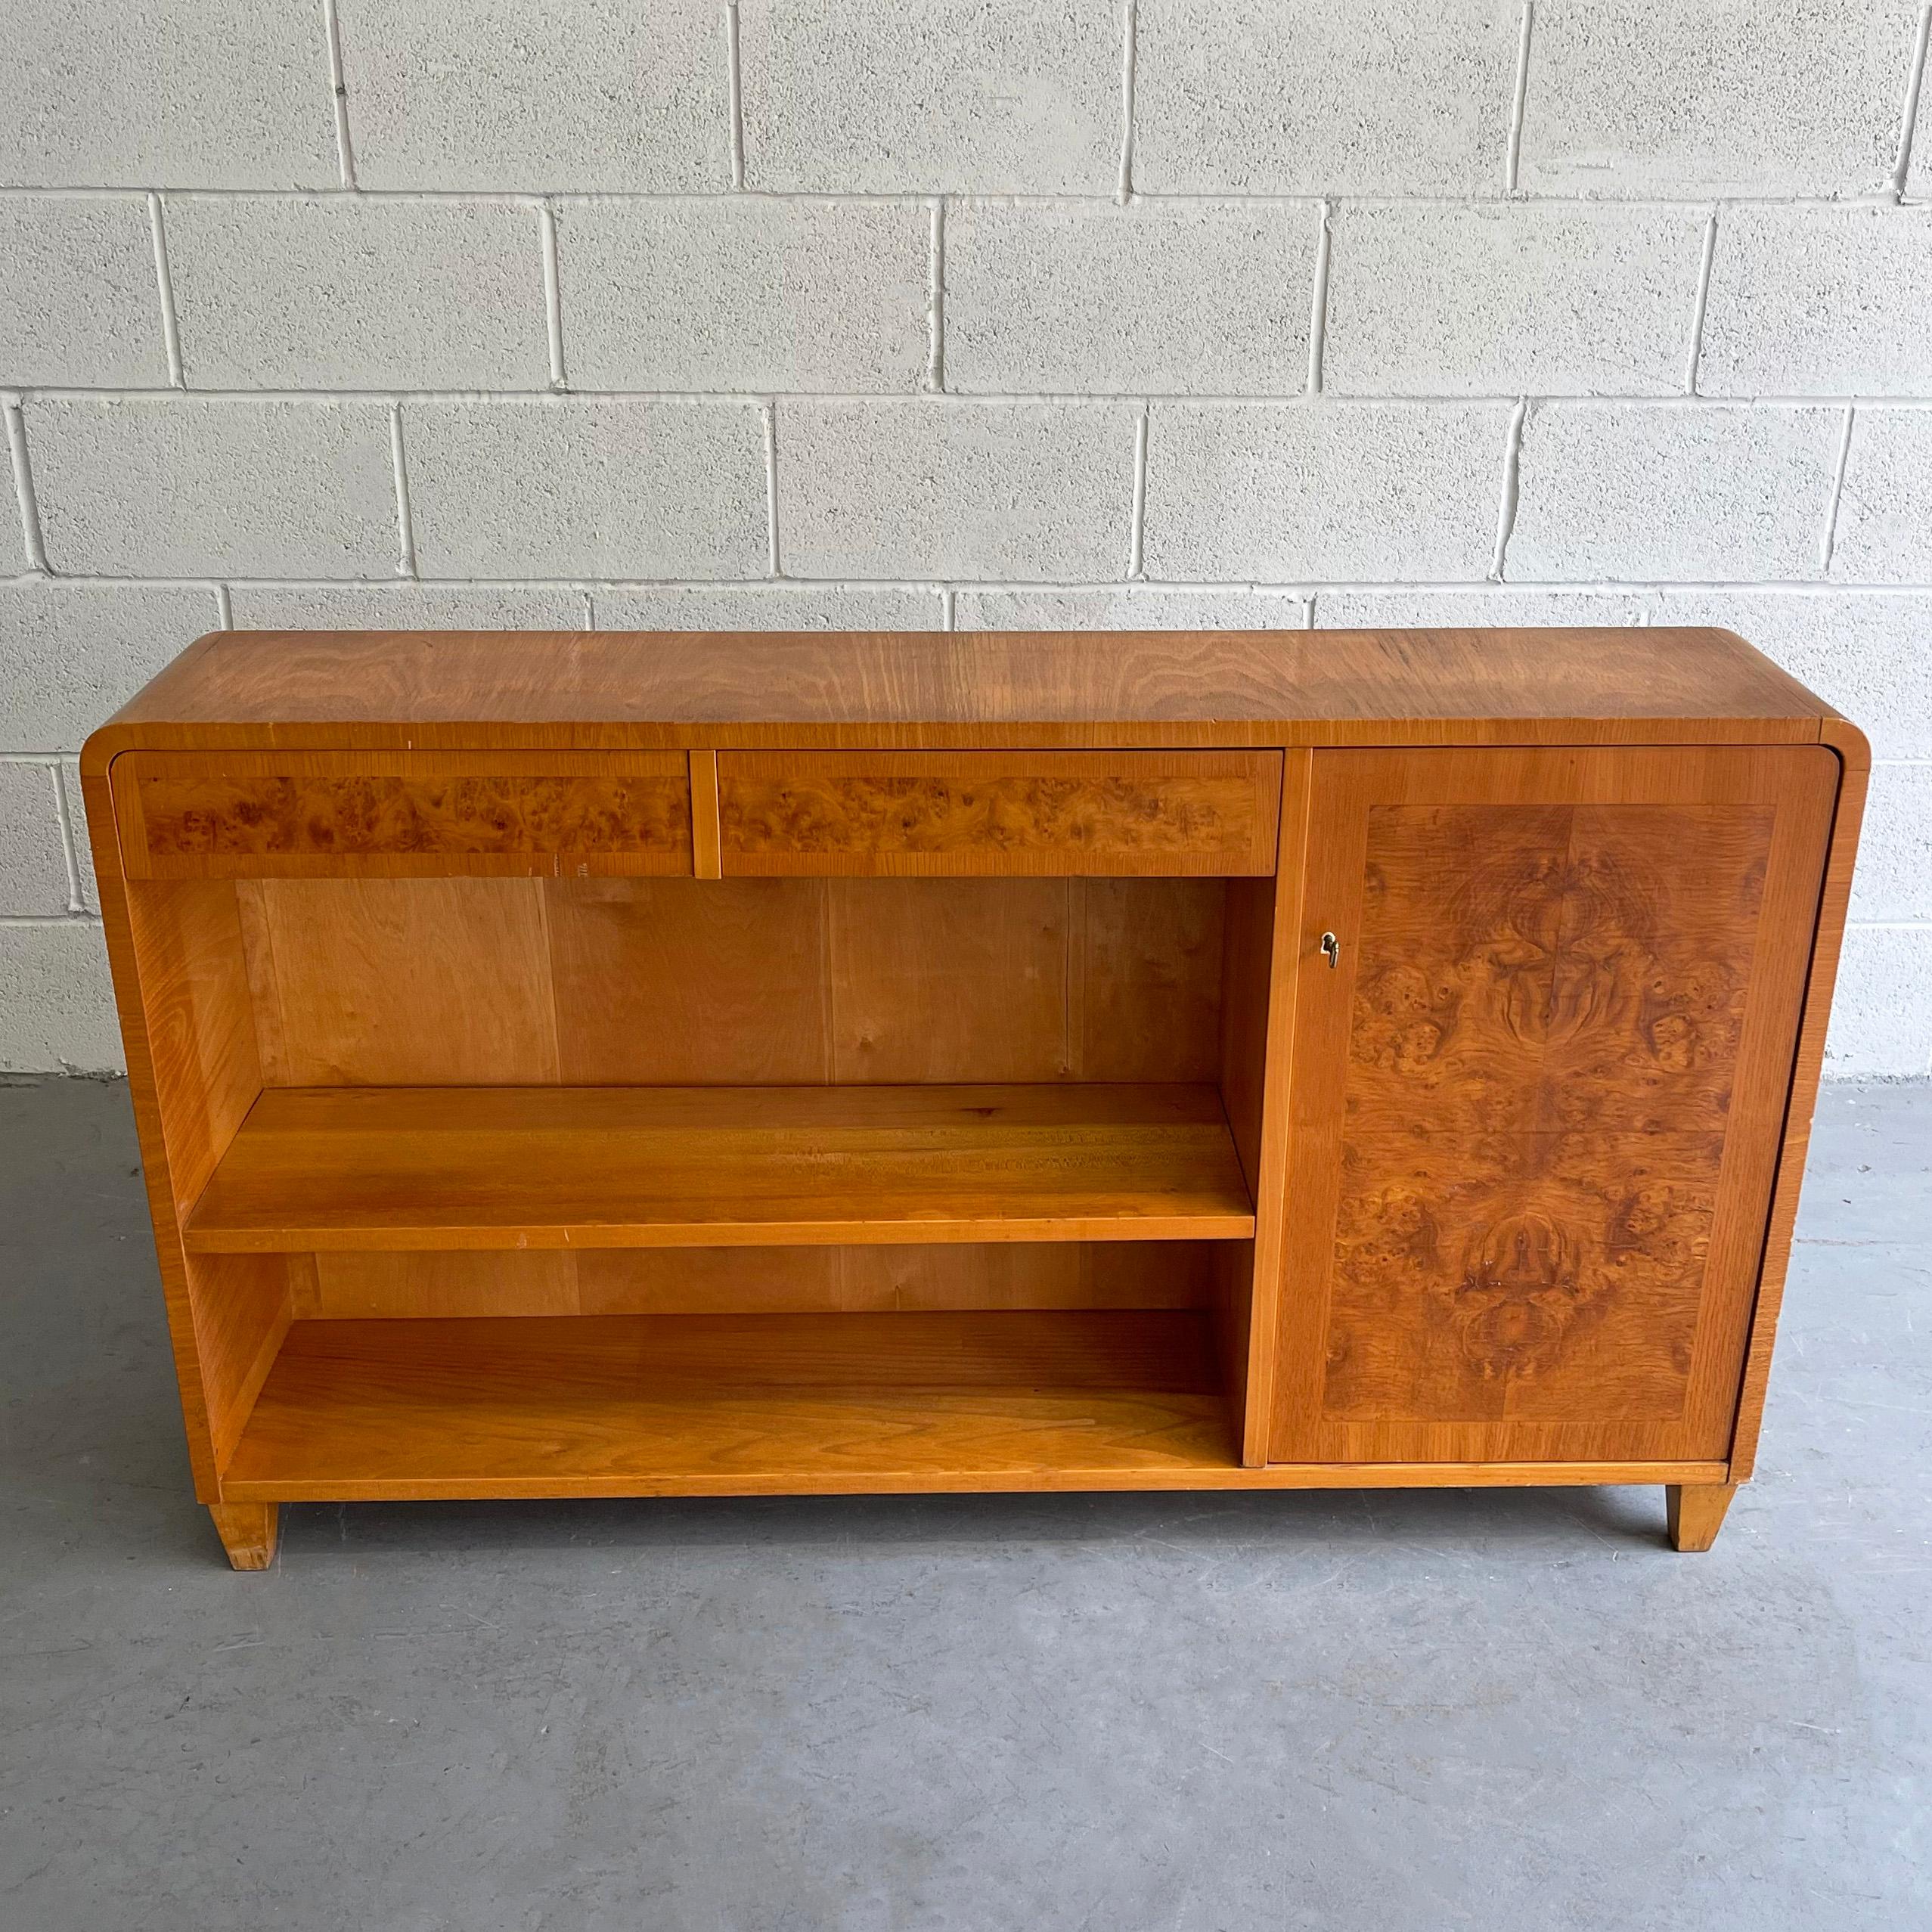 Biedermeier style, satinwood, bookcase cabinet or credenza features shelves, drawers and lockable side cabinet. This piece is nicely shallow at 10 inches depth but wide enough to offer great storage.